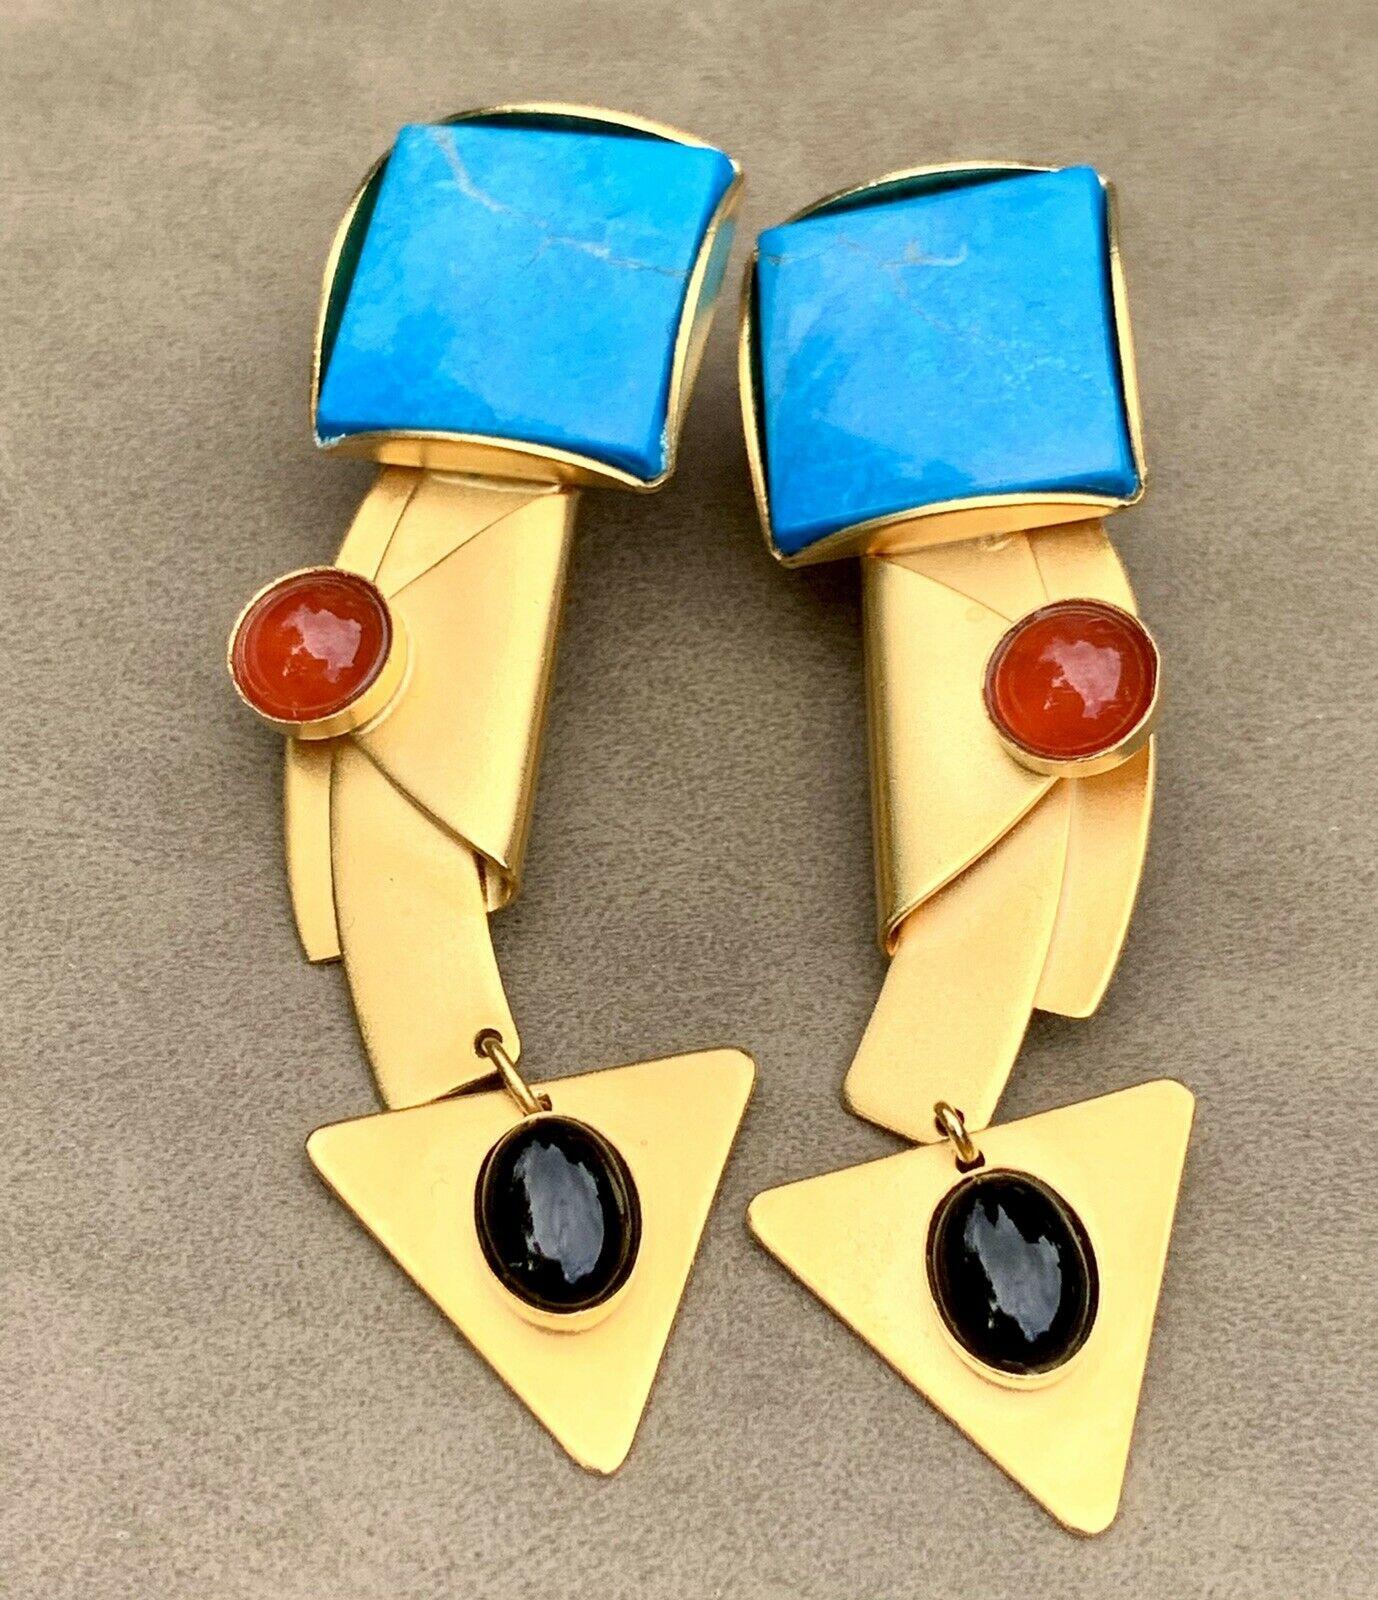 Fabulous Signed Gale Rothstein Designer Modernist Long Multi-Gem Turquoise, Onyx and Carnelian Agate Dangle Earrings. 18K Gold plate over brass. Measuring approx. 2.5” long x 0.5” wide. Striking Abstract design. Signed on the back: GALE ROTHSTEIN